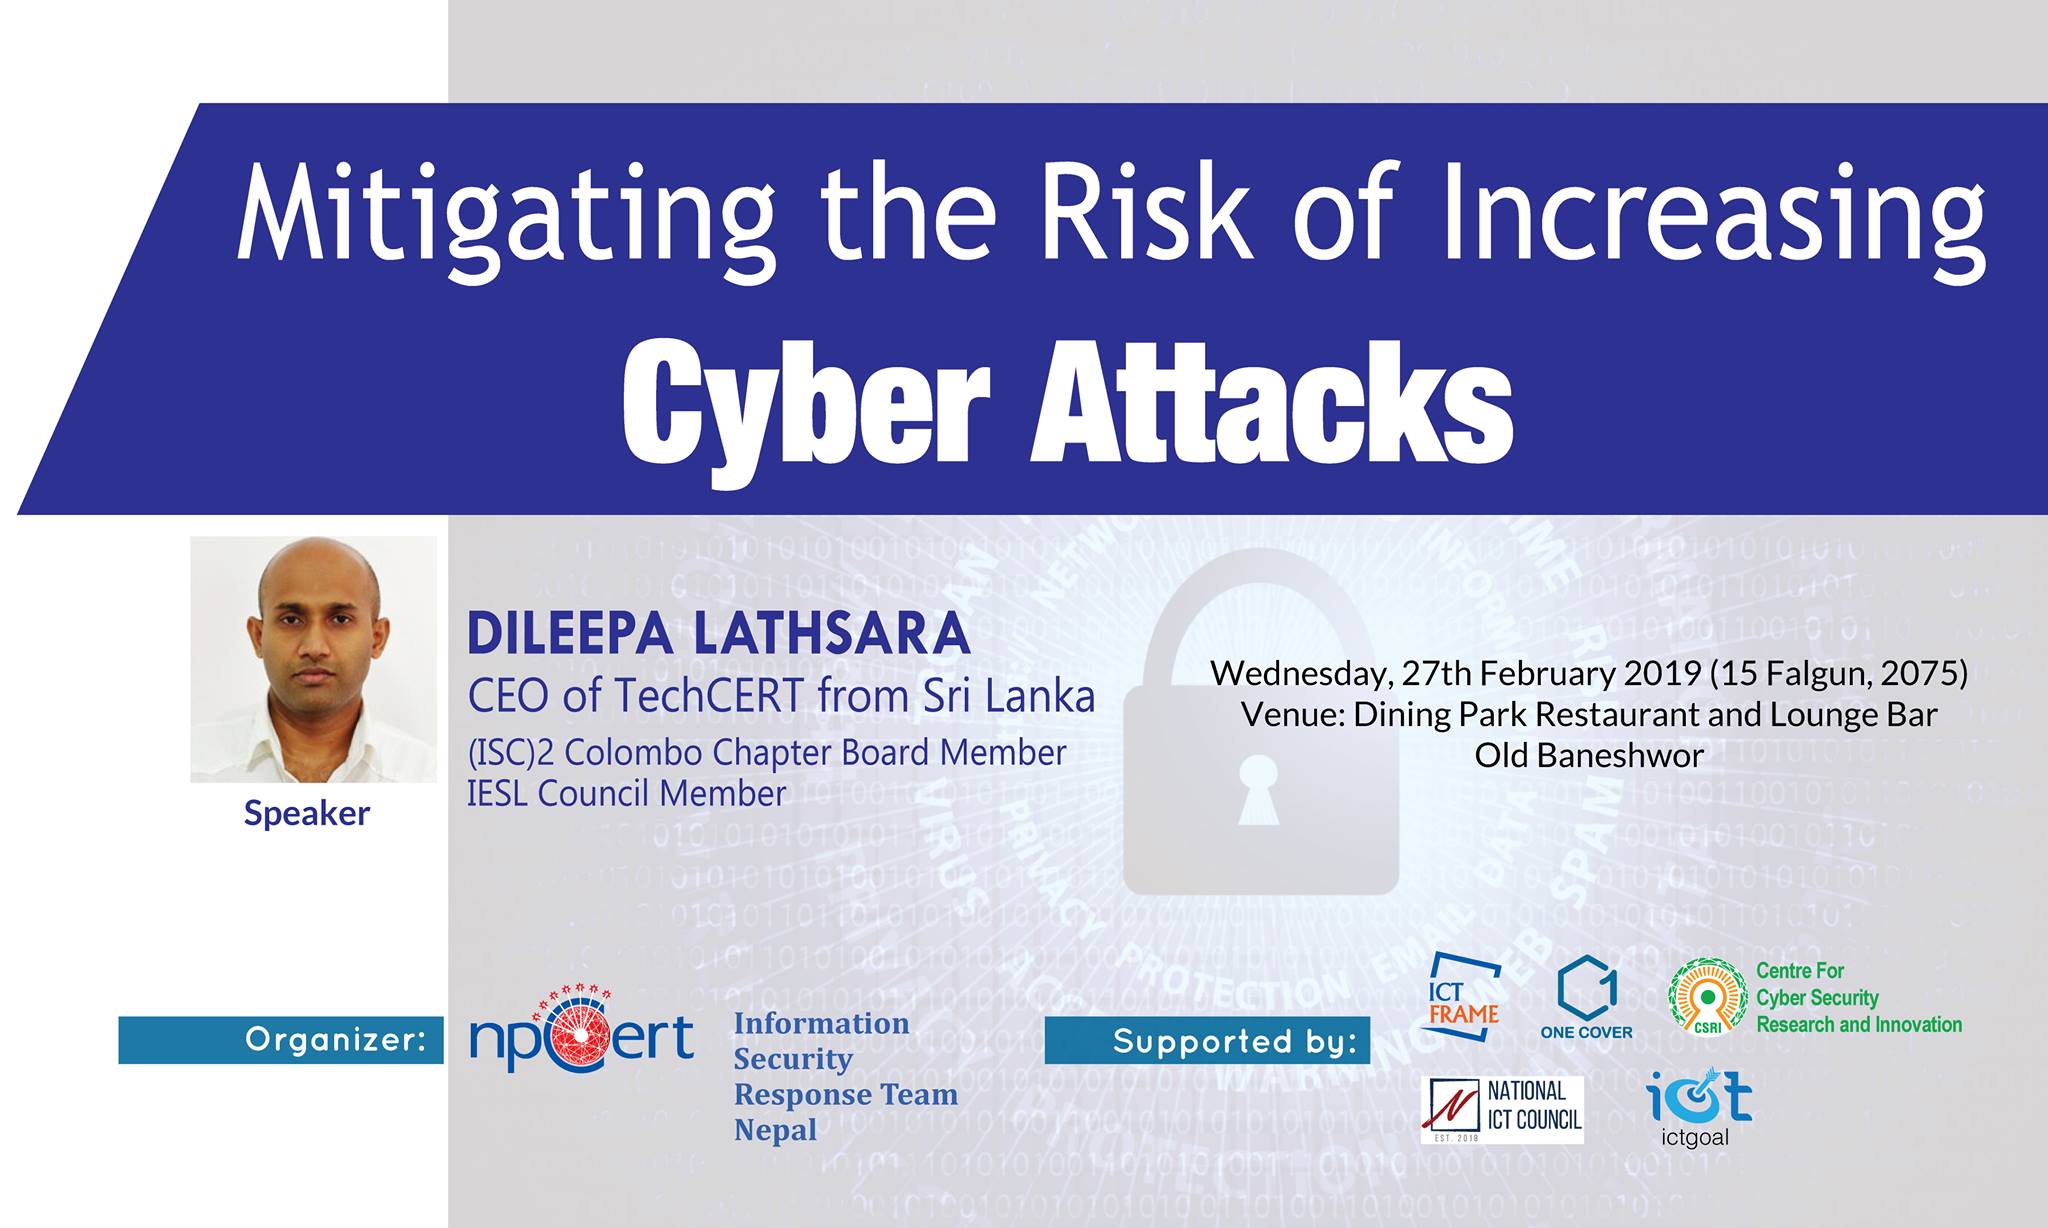 Mitigating the Risk of Increasing Cyber Attacks